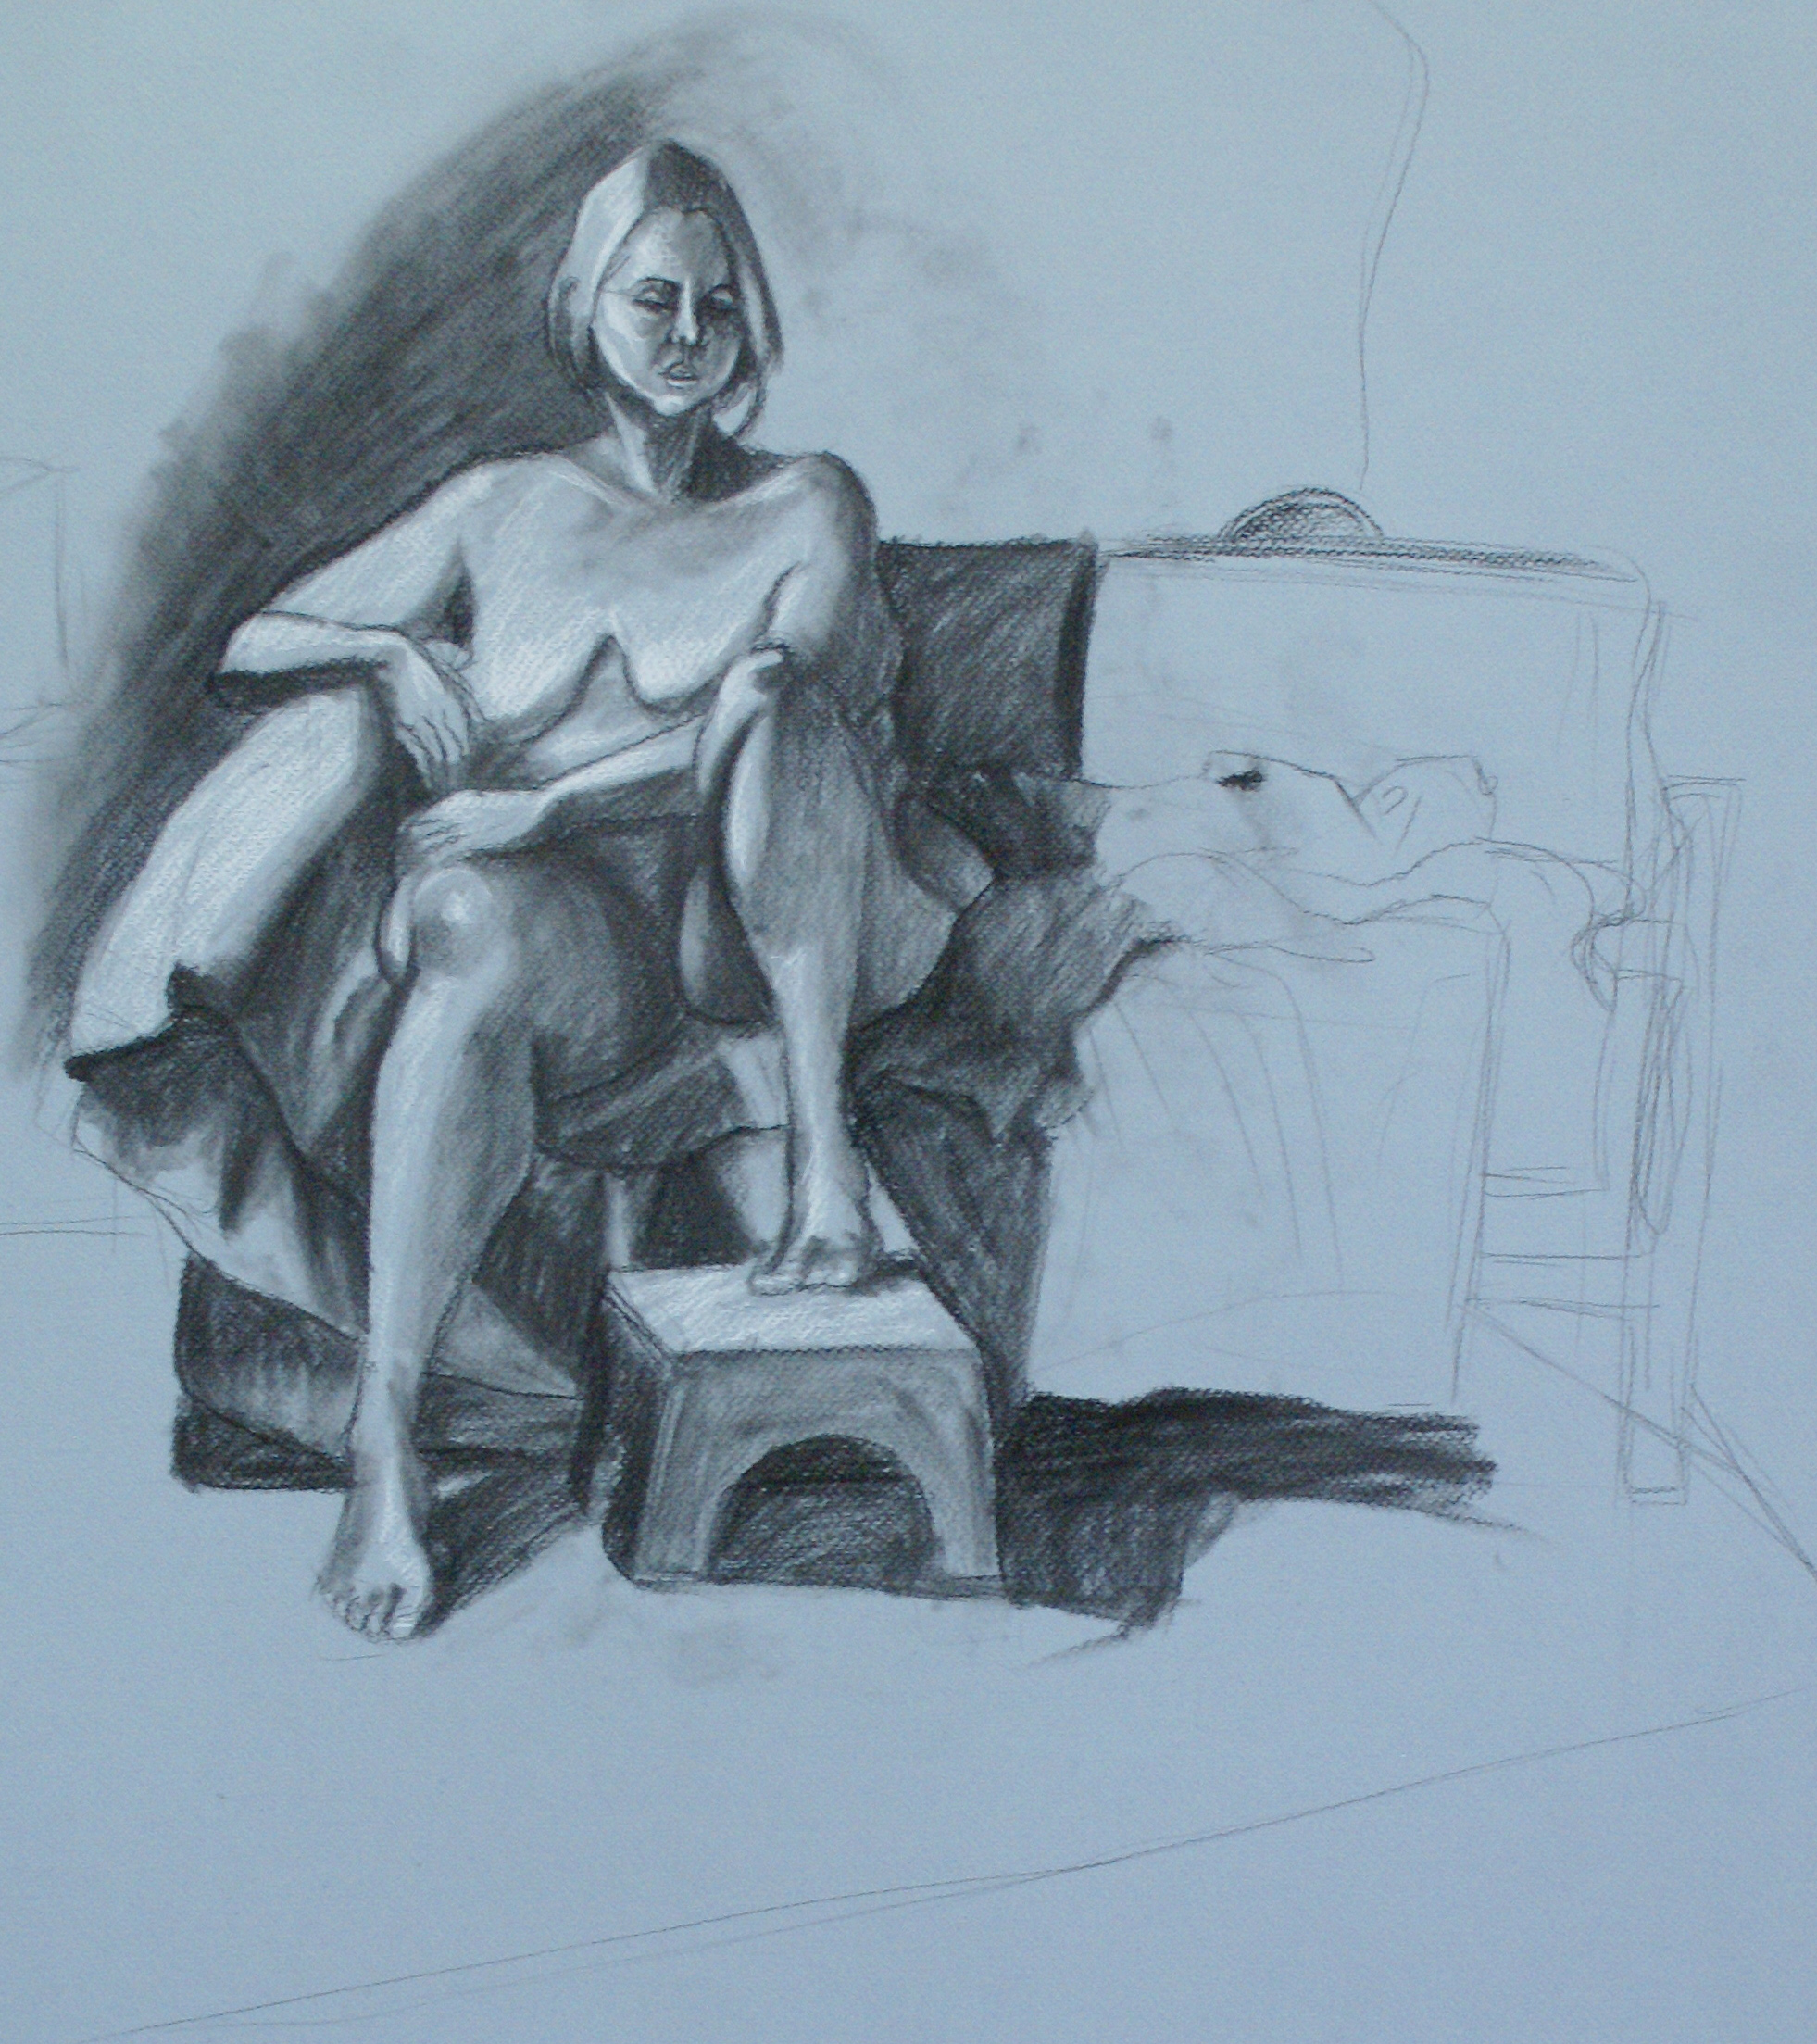 Orlando Rodriguez. Anatomy and Figure Drawing II. Charcoal on toned paper. 18 x 24 in.